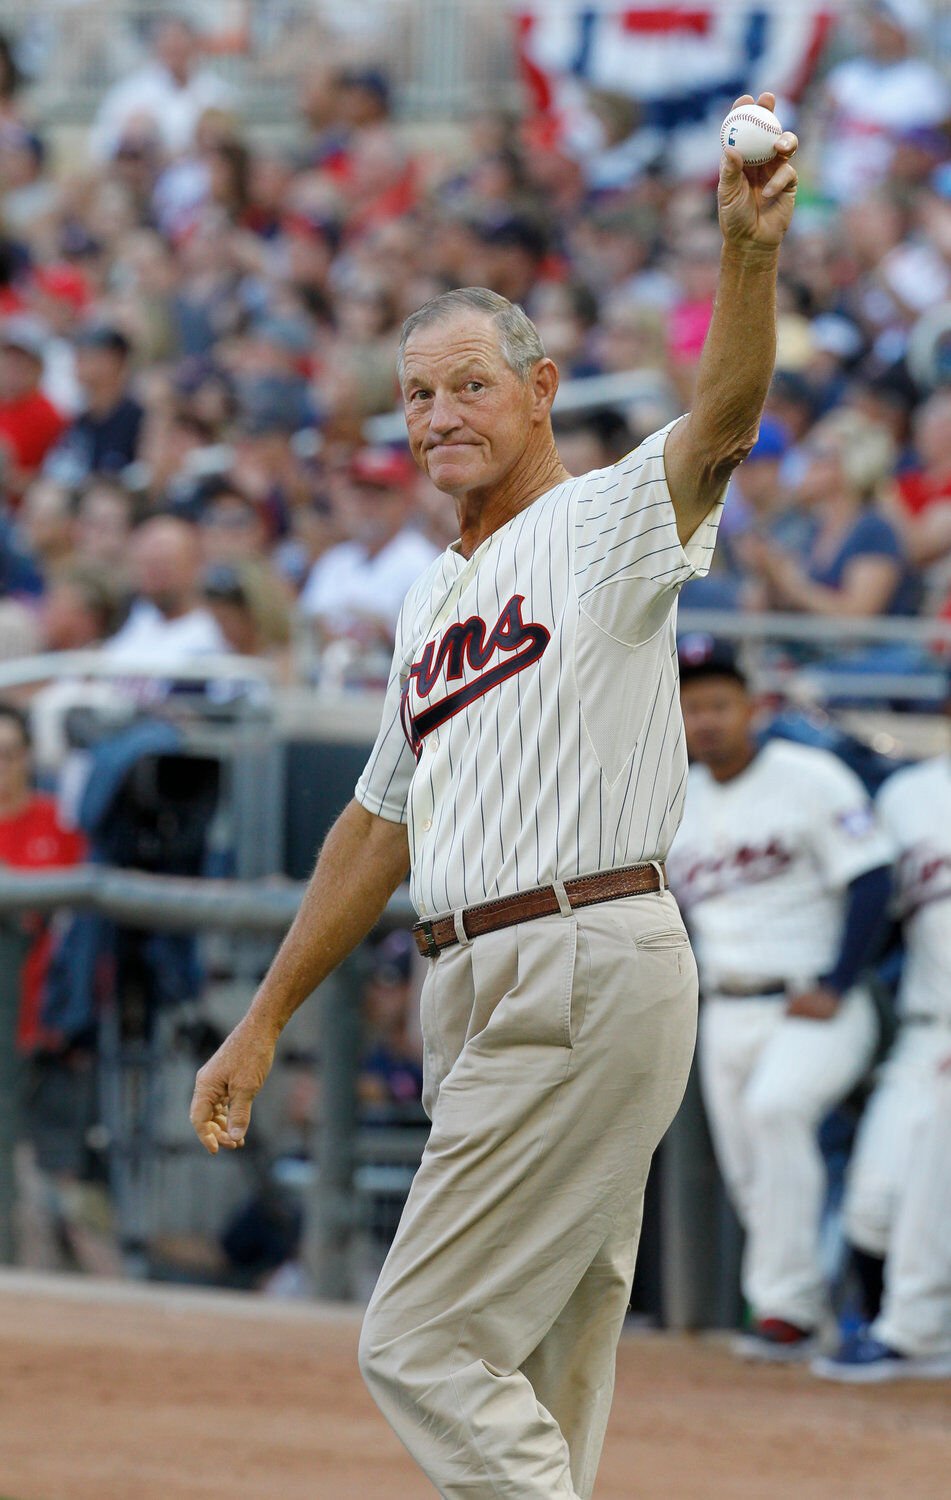 MLB legend Jim Kaat is special guest at our 2020 Regional All Stars gala